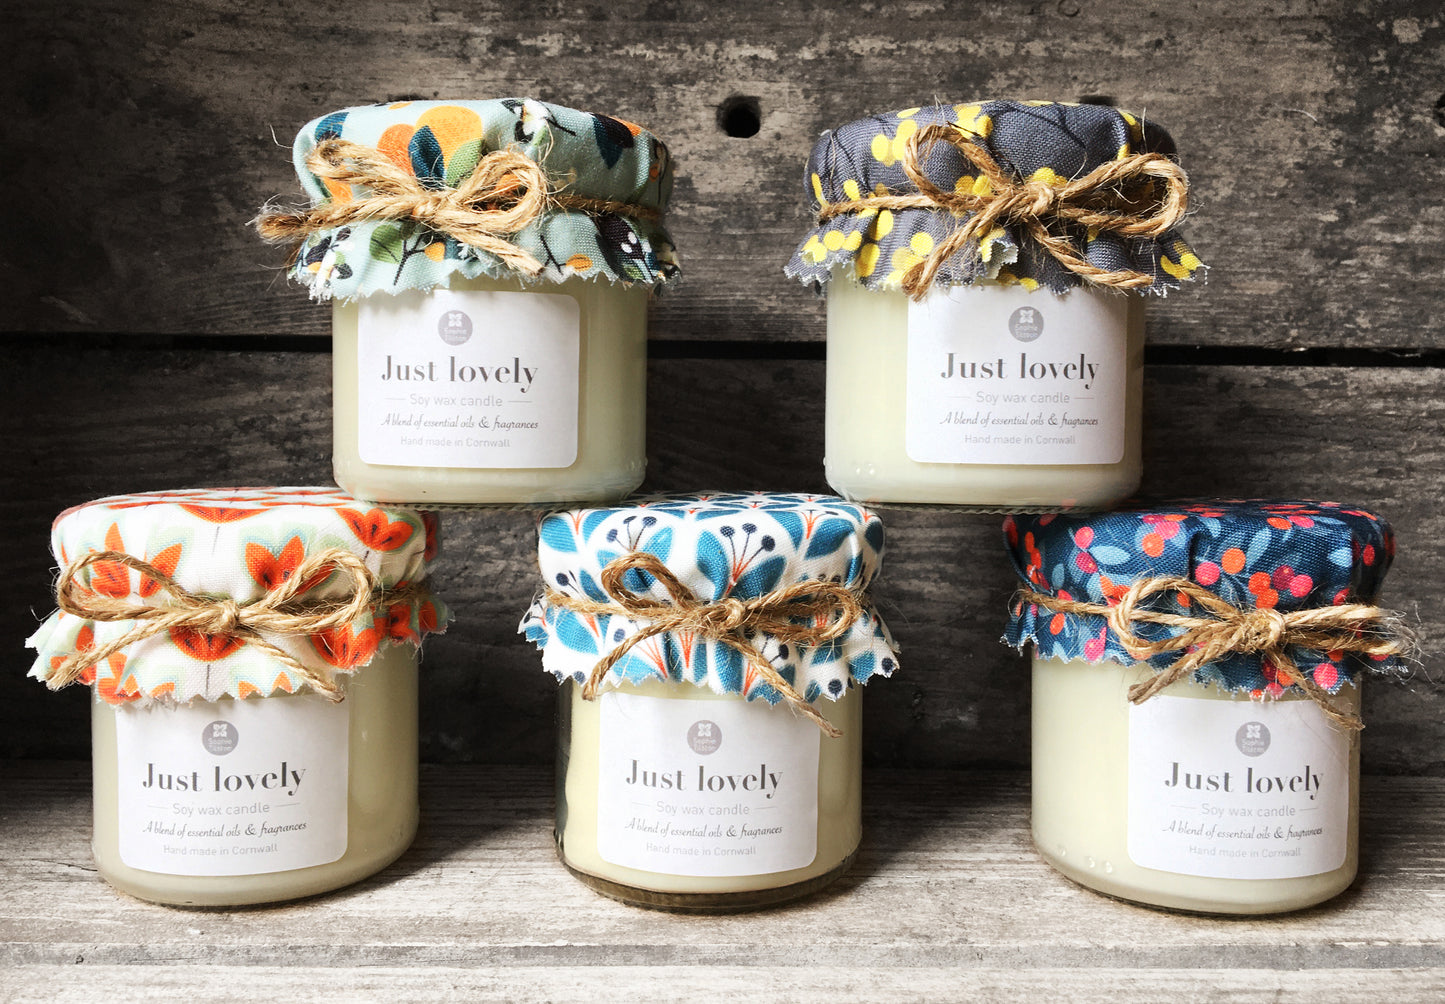 JUST LOVELY (Sweet berry fabric) Handmade scented jam jar candle